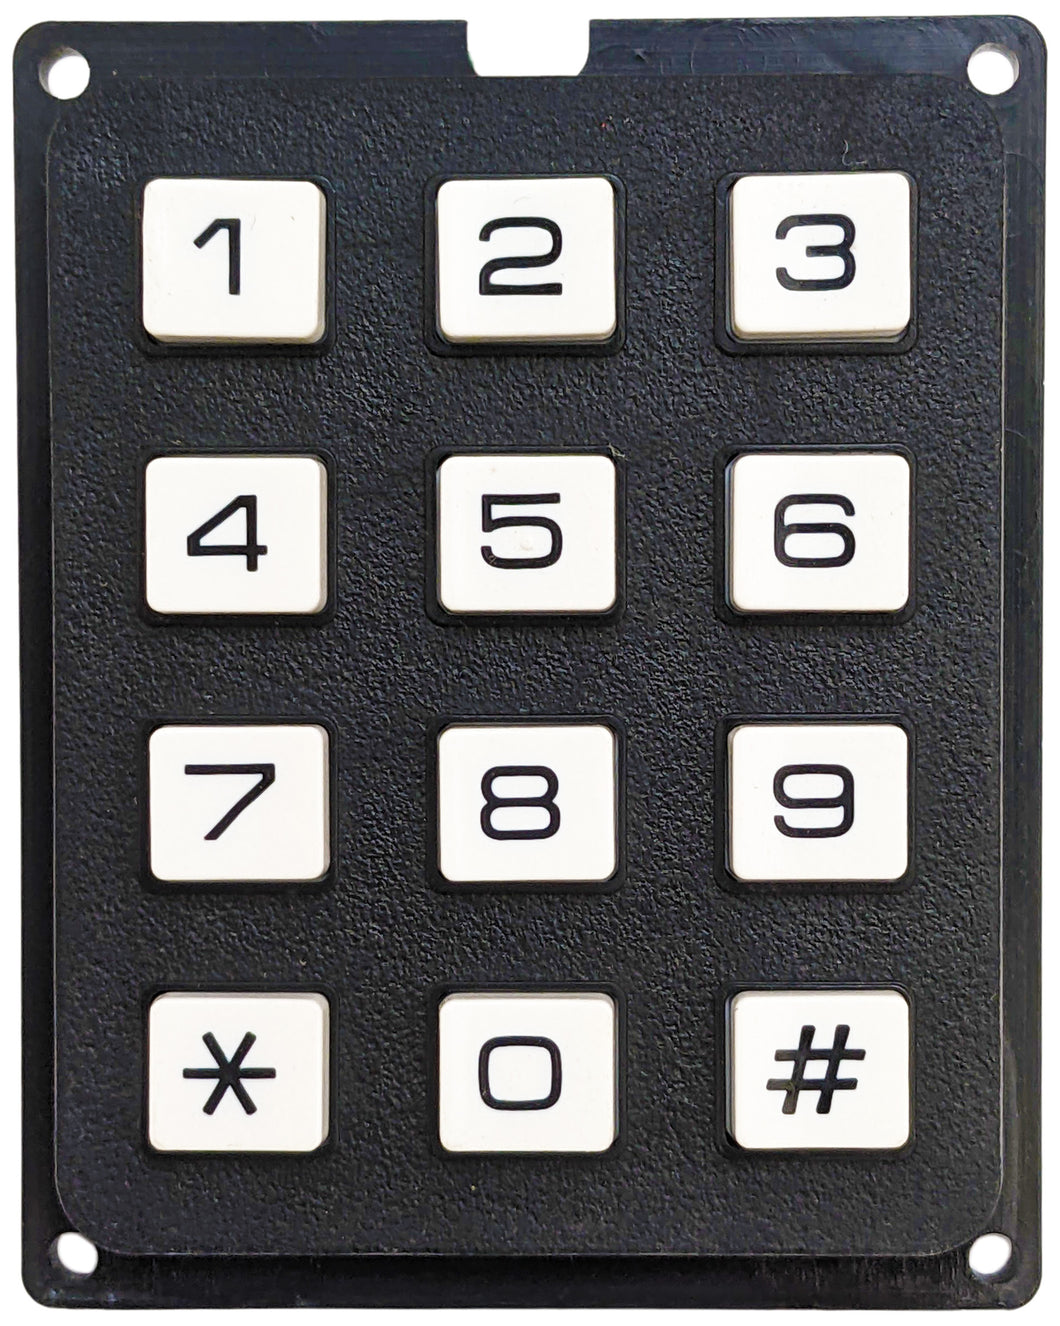 12 Button Keypad with .1